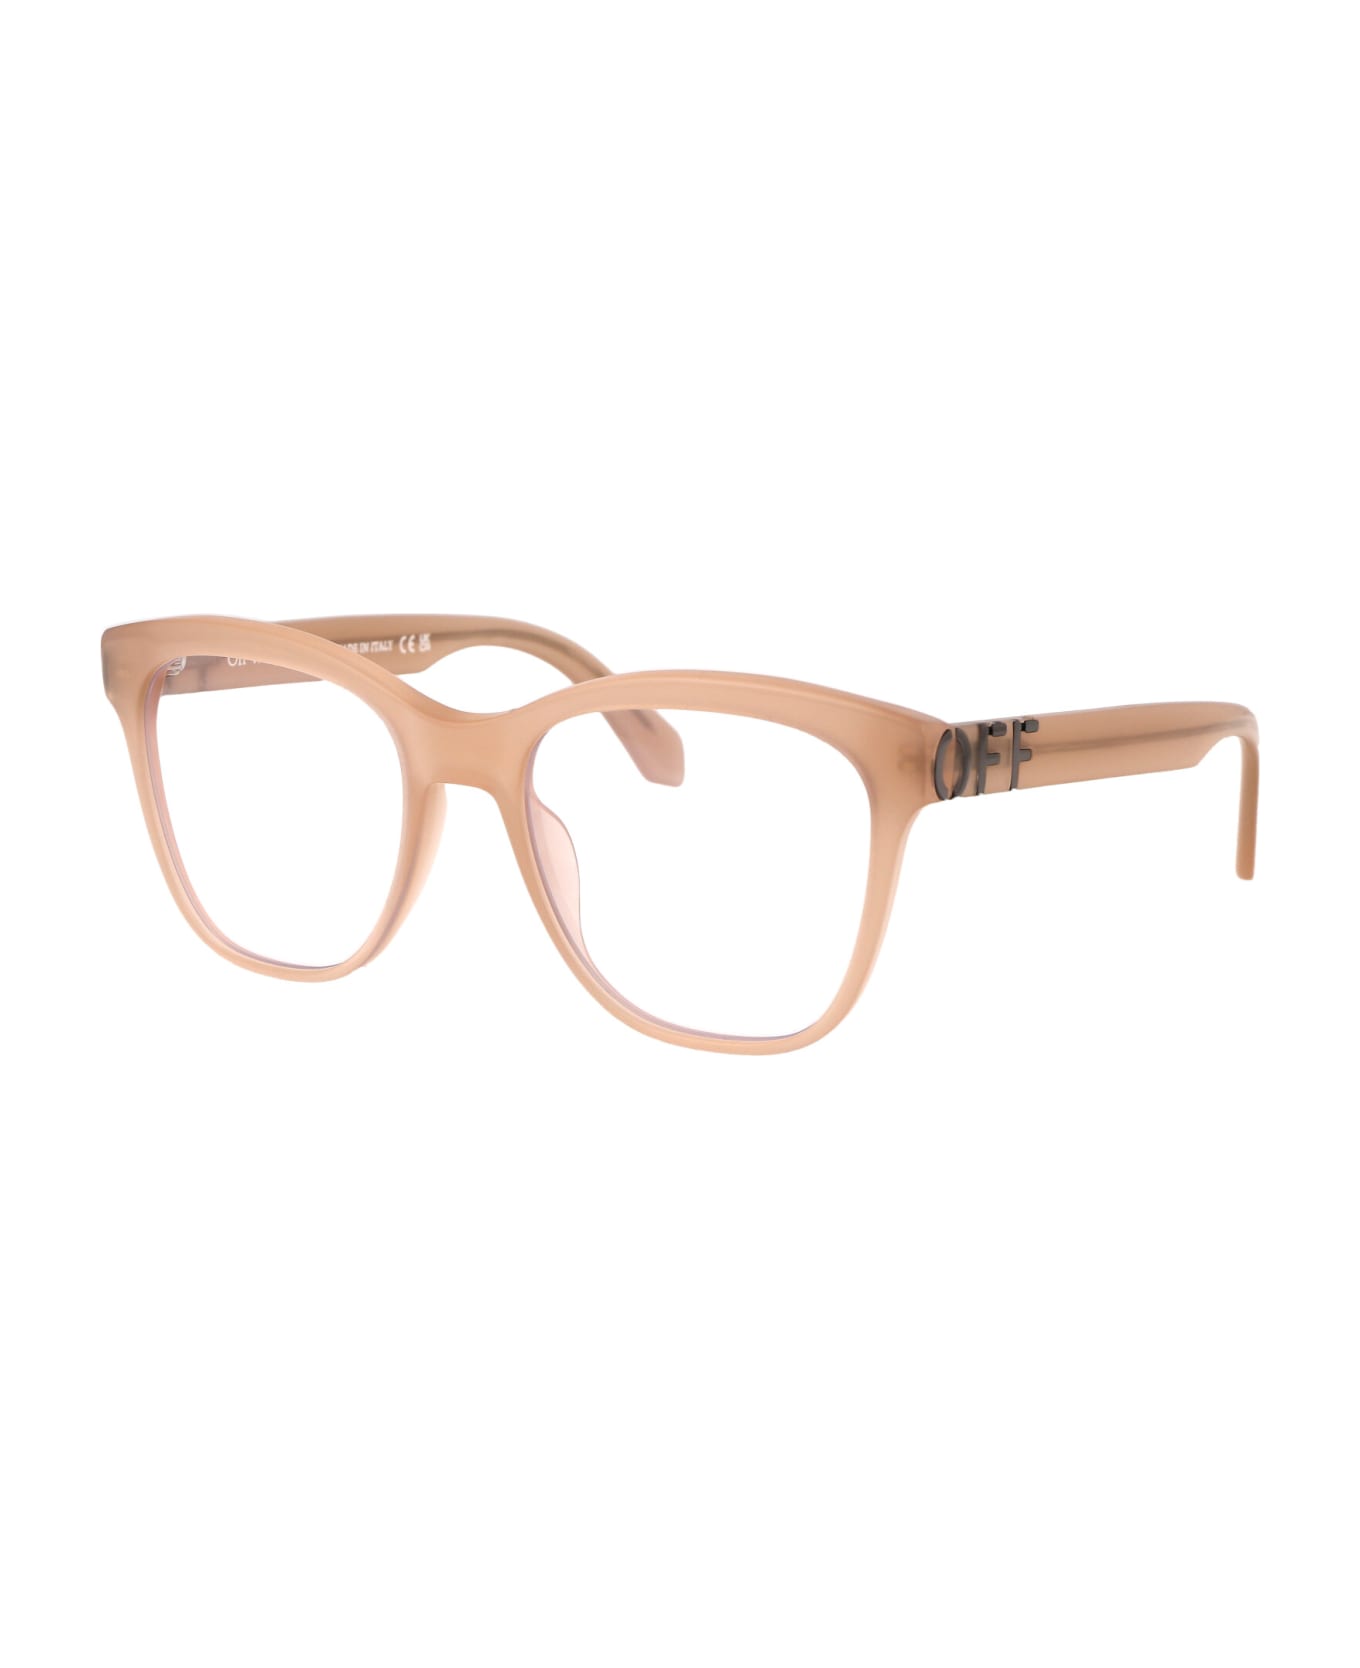 Off-White Optical Style 69 Glasses - 6100 BEIGE 